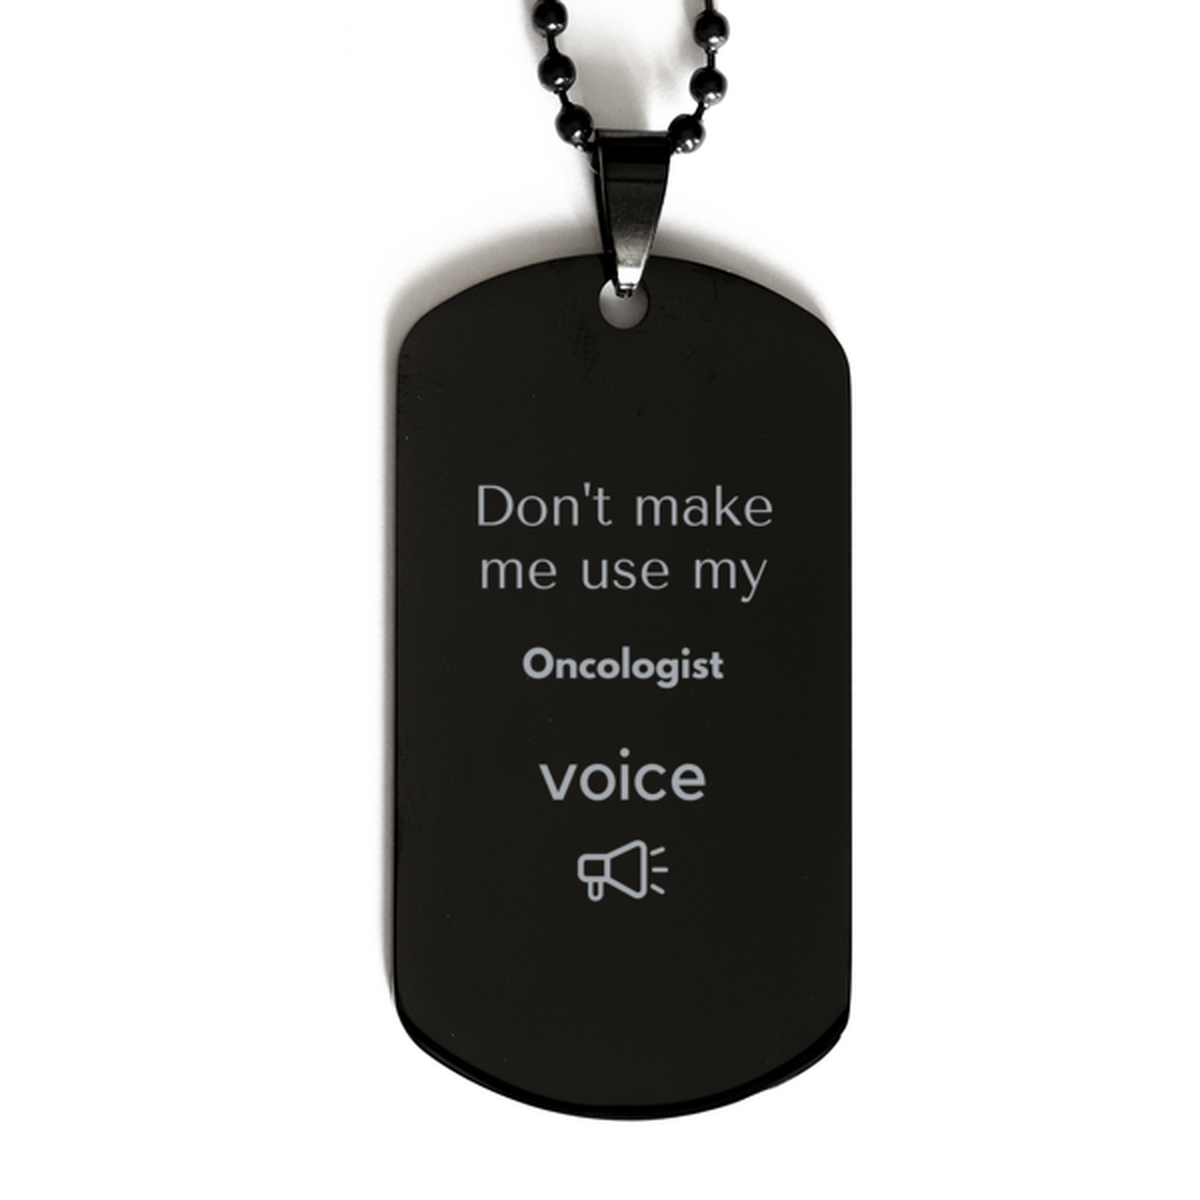 Don't make me use my Oncologist voice, Sarcasm Oncologist Gifts, Christmas Oncologist Black Dog Tag Birthday Unique Gifts For Oncologist Coworkers, Men, Women, Colleague, Friends